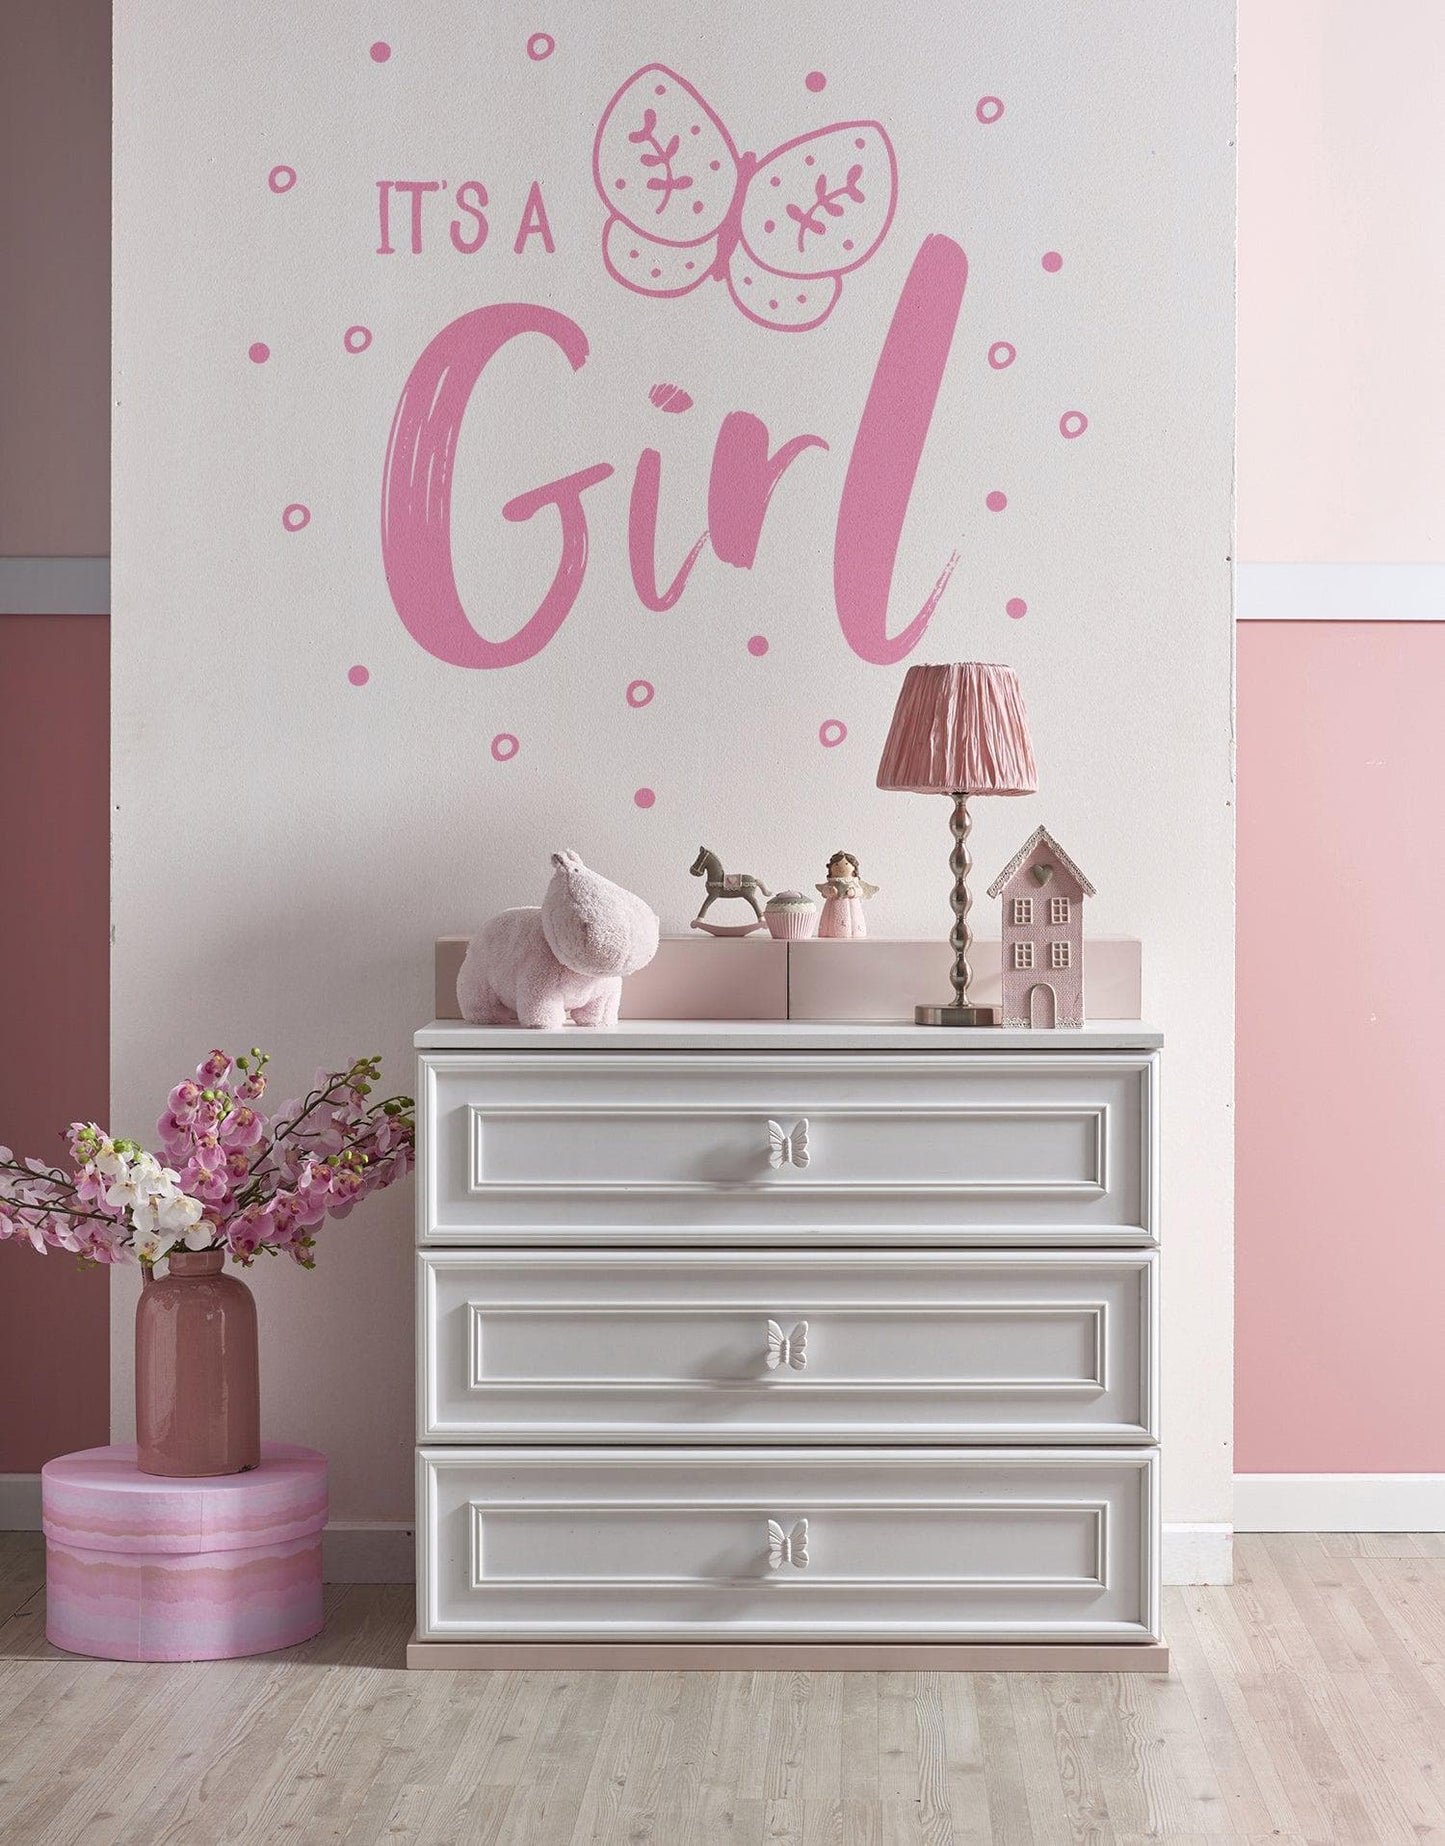 It’s a Girl Gender Reveal Vinyl Wall Decal Sticker. Perfect decoration for a Baby Reveal / Baby Shower party. #6188